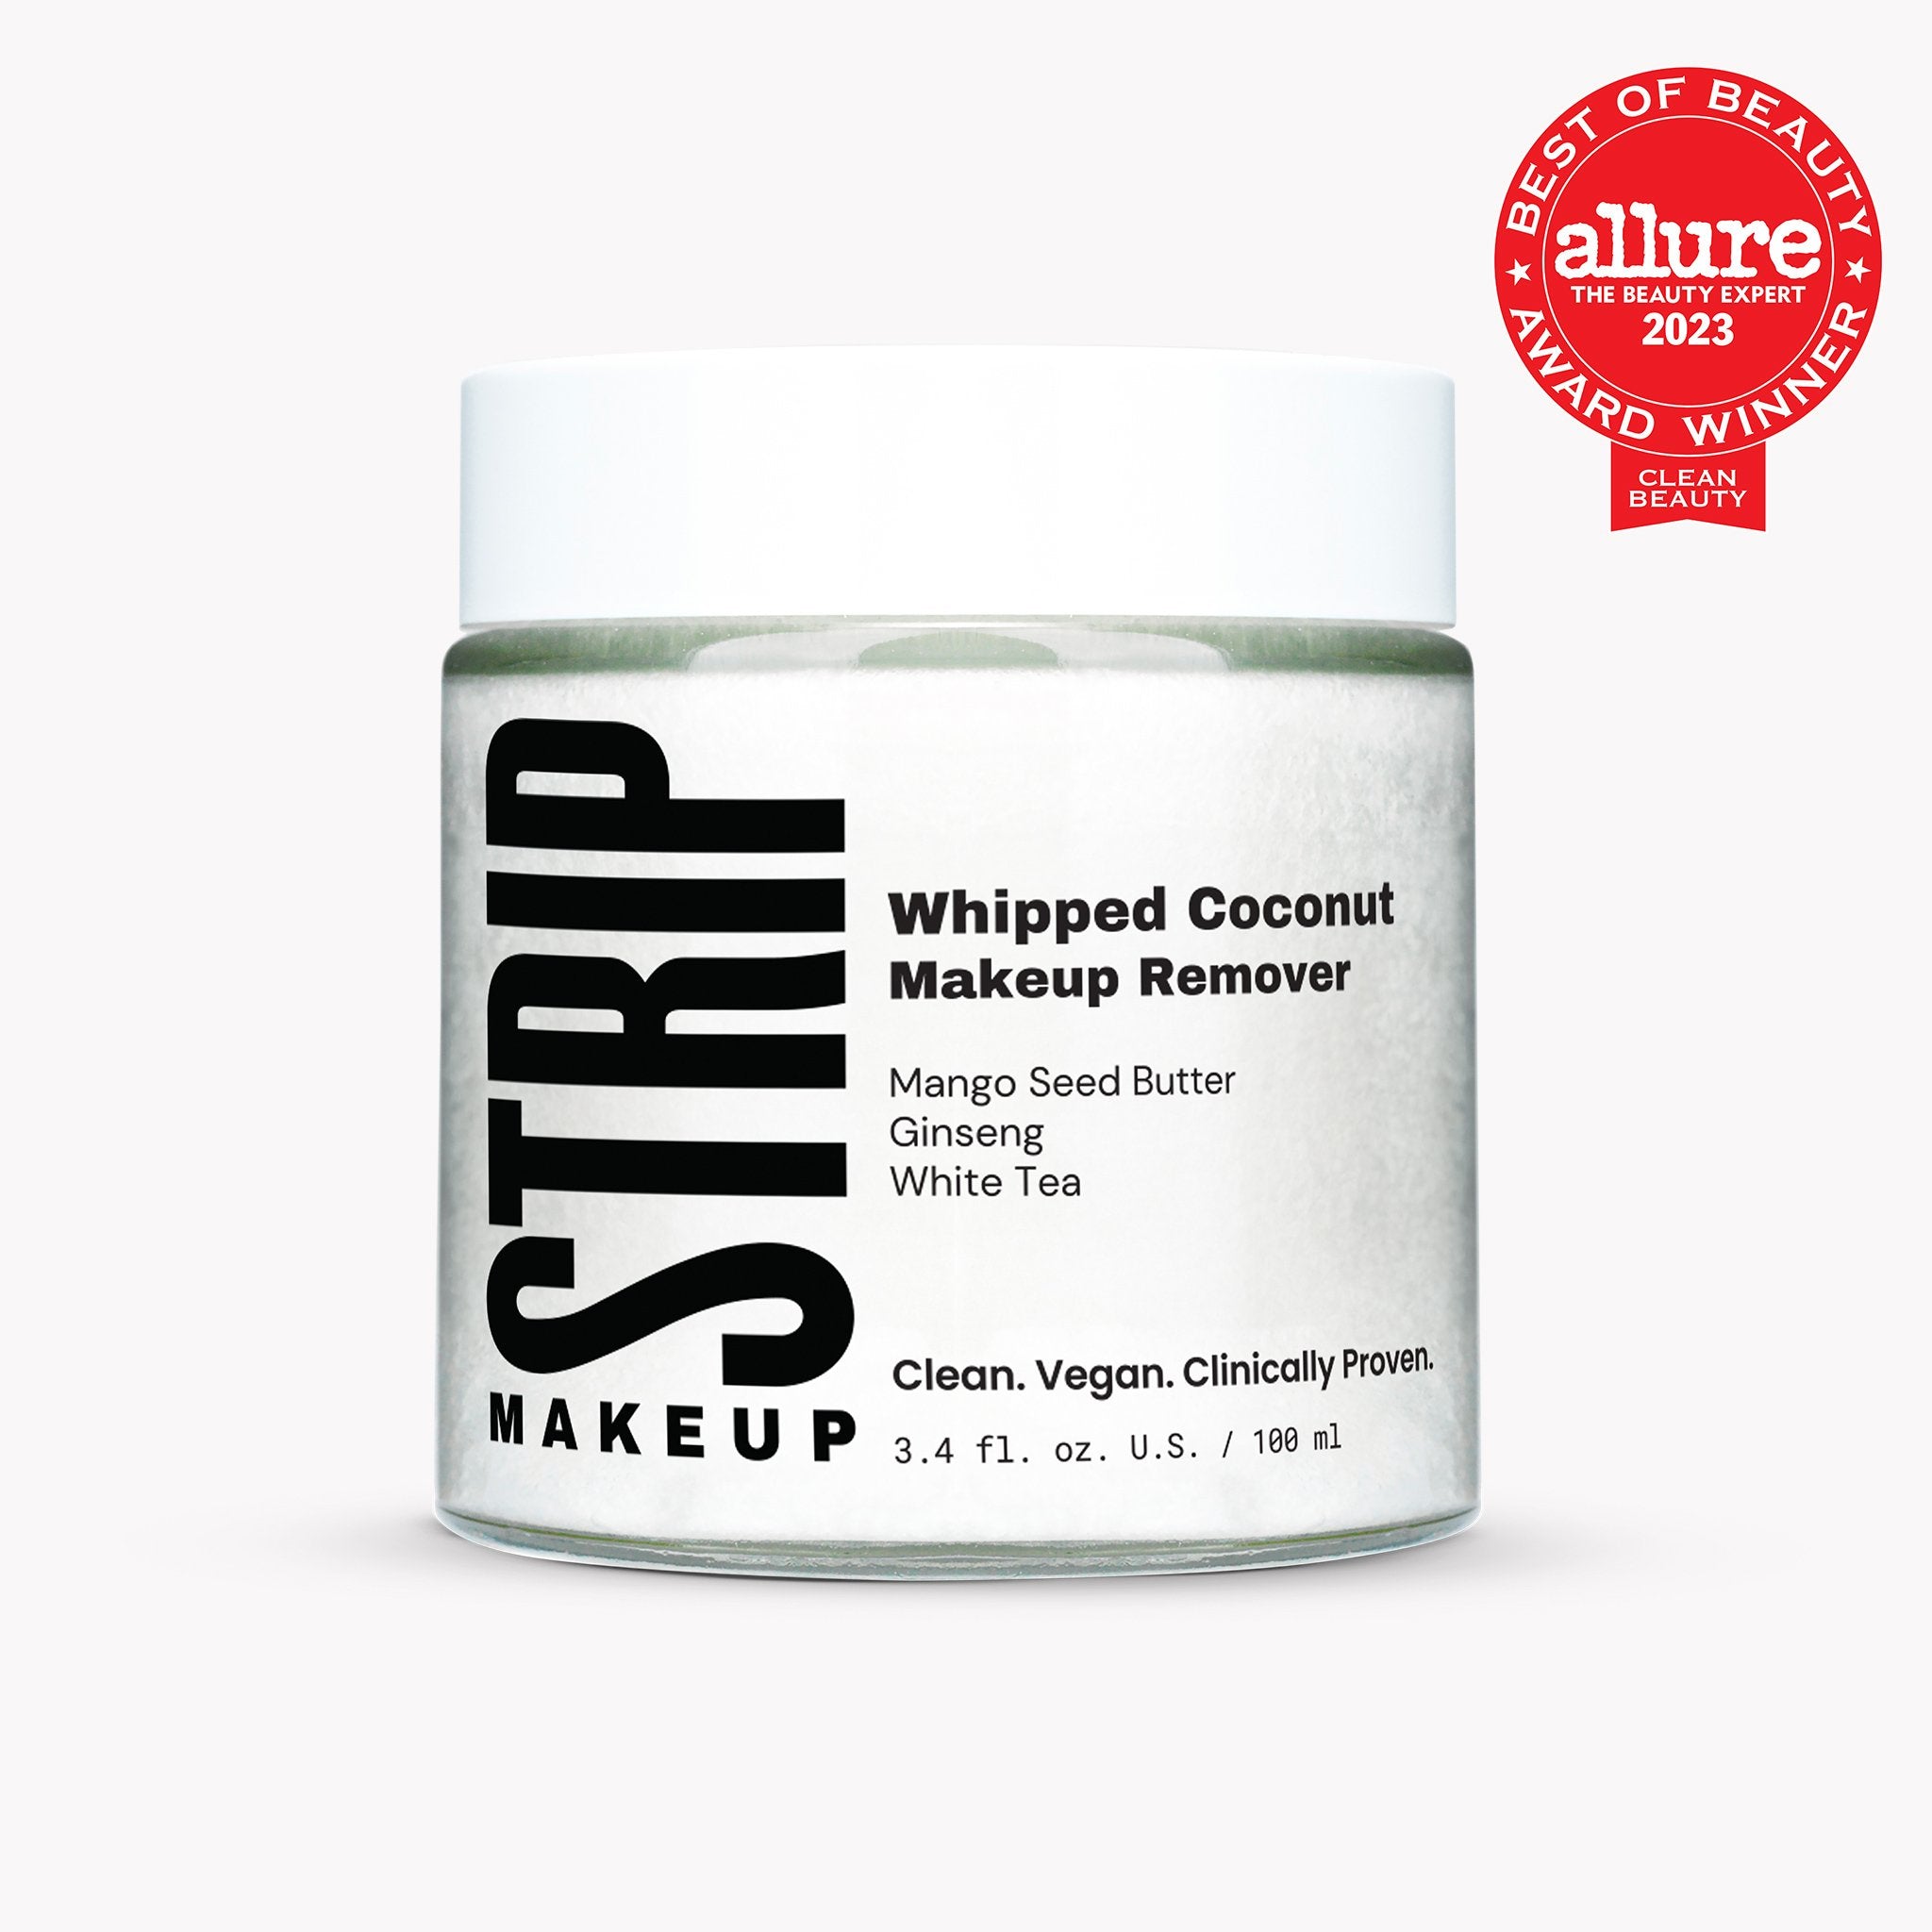 Whipped Coconut Makeup Remover